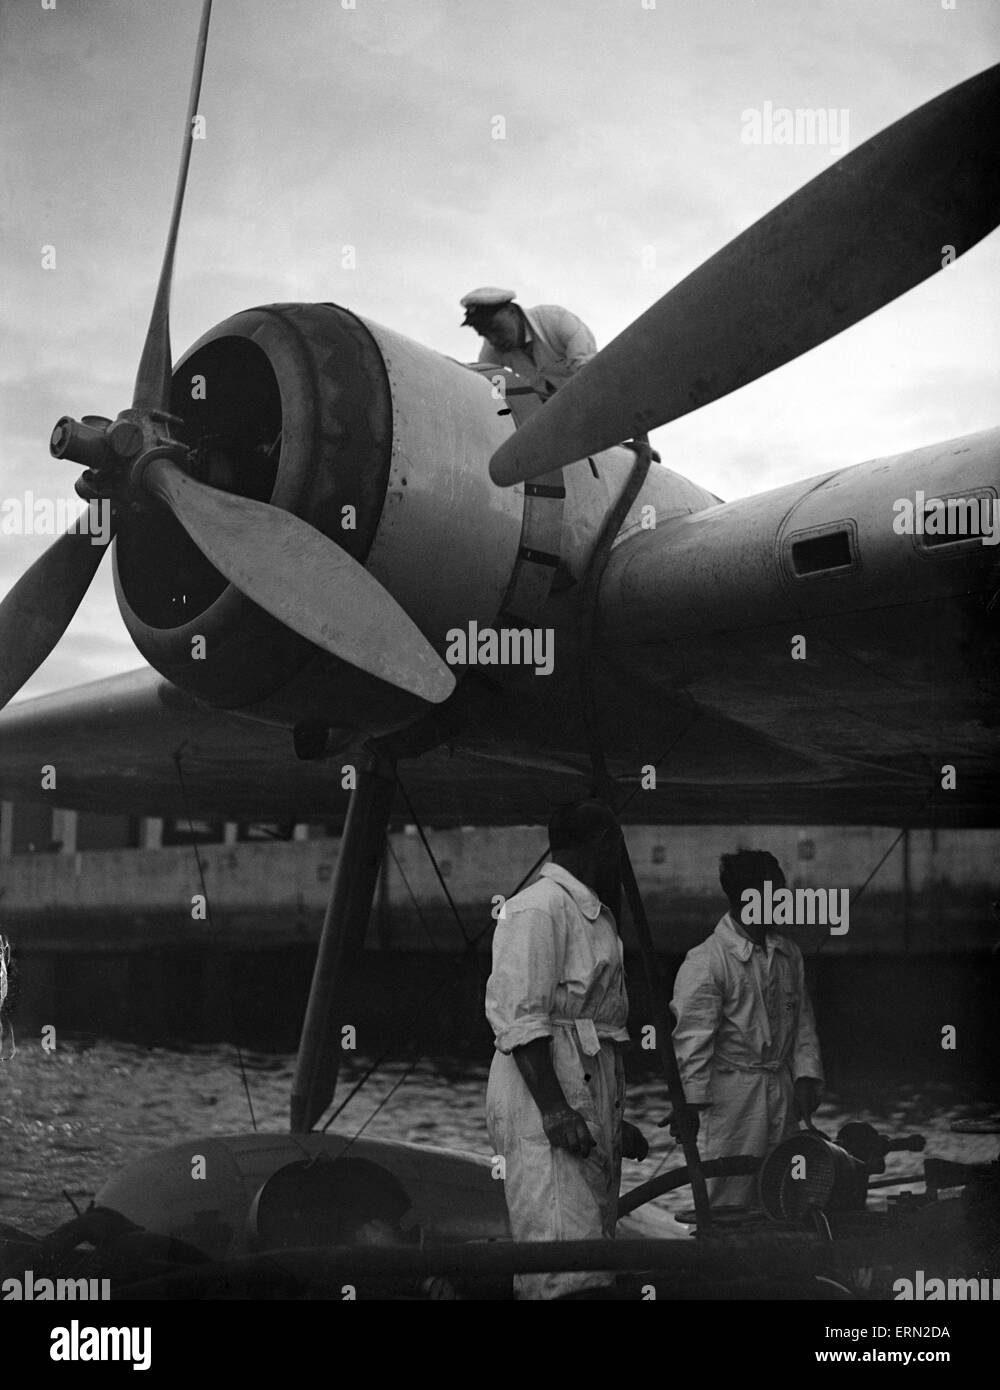 Series of images for Daily Herald Feature flight to Australia. 26th June 1938 Imperial Airways staff check the Bristol Pegasus Xc poppet valve radial engines of the Shorts C Class Empire Flying Boat G-AEUD Cordelia prior to its flight for Brisbane at Sout Stock Photo